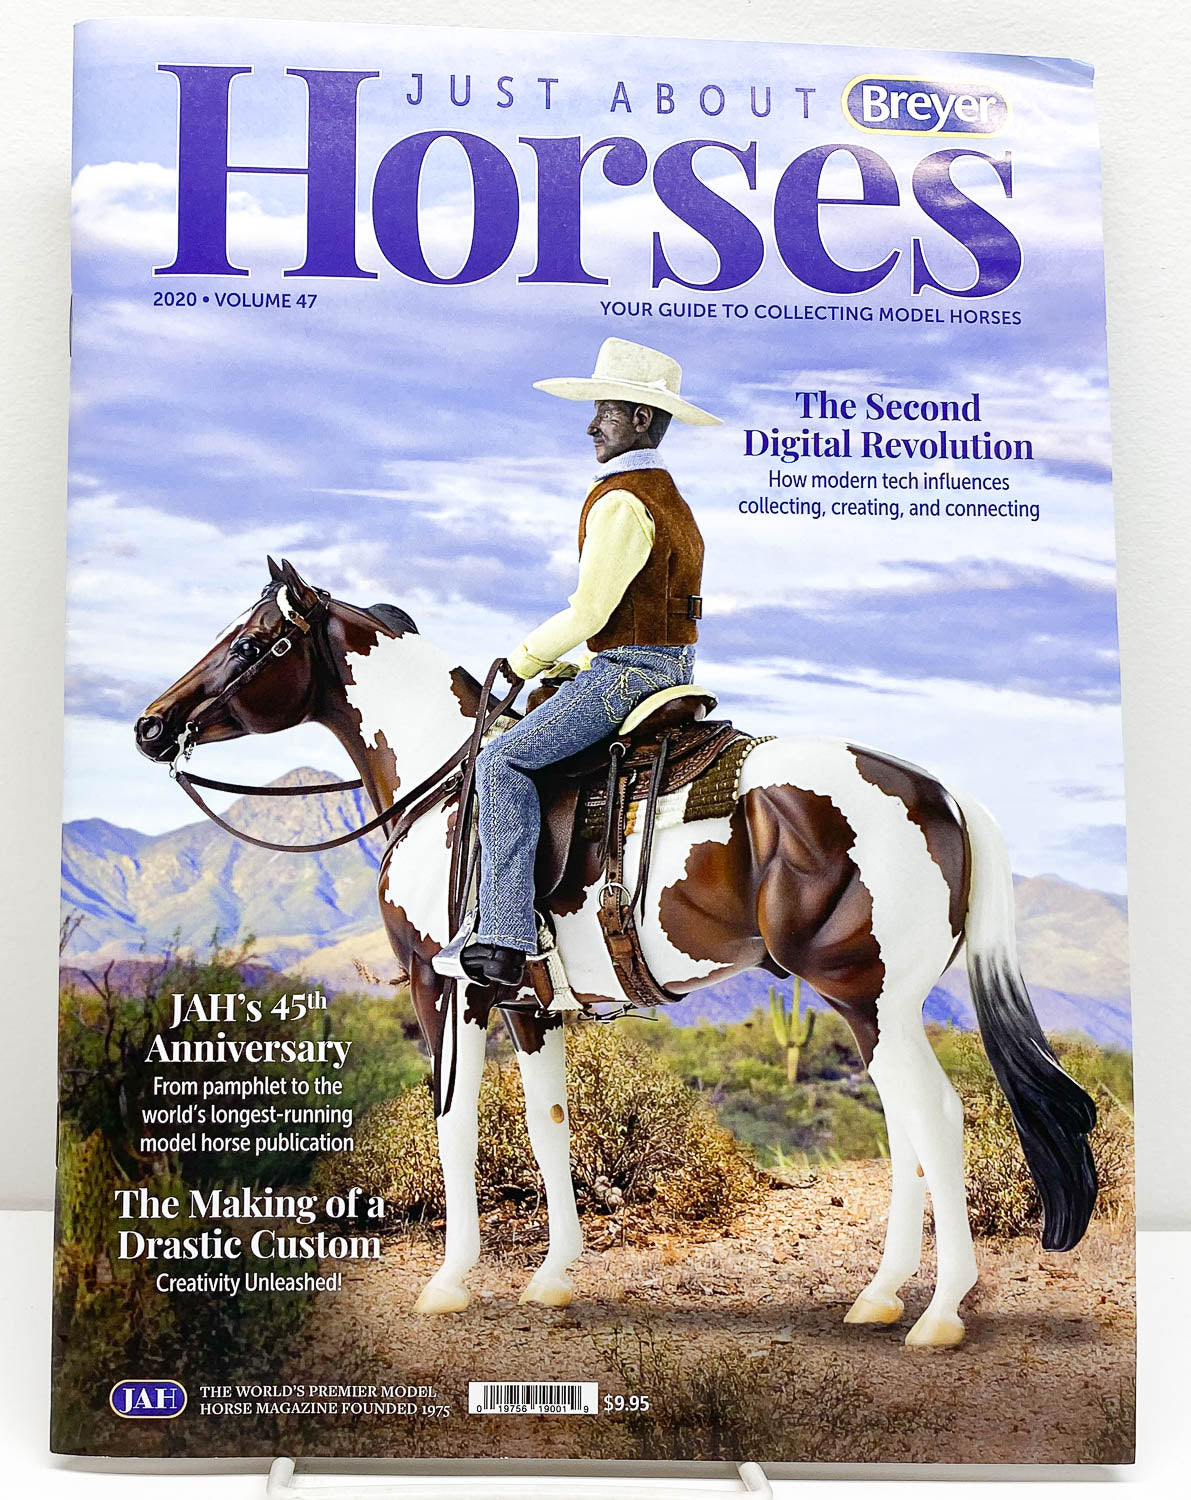 Just About Horses Magazine Vol. 47, 2020